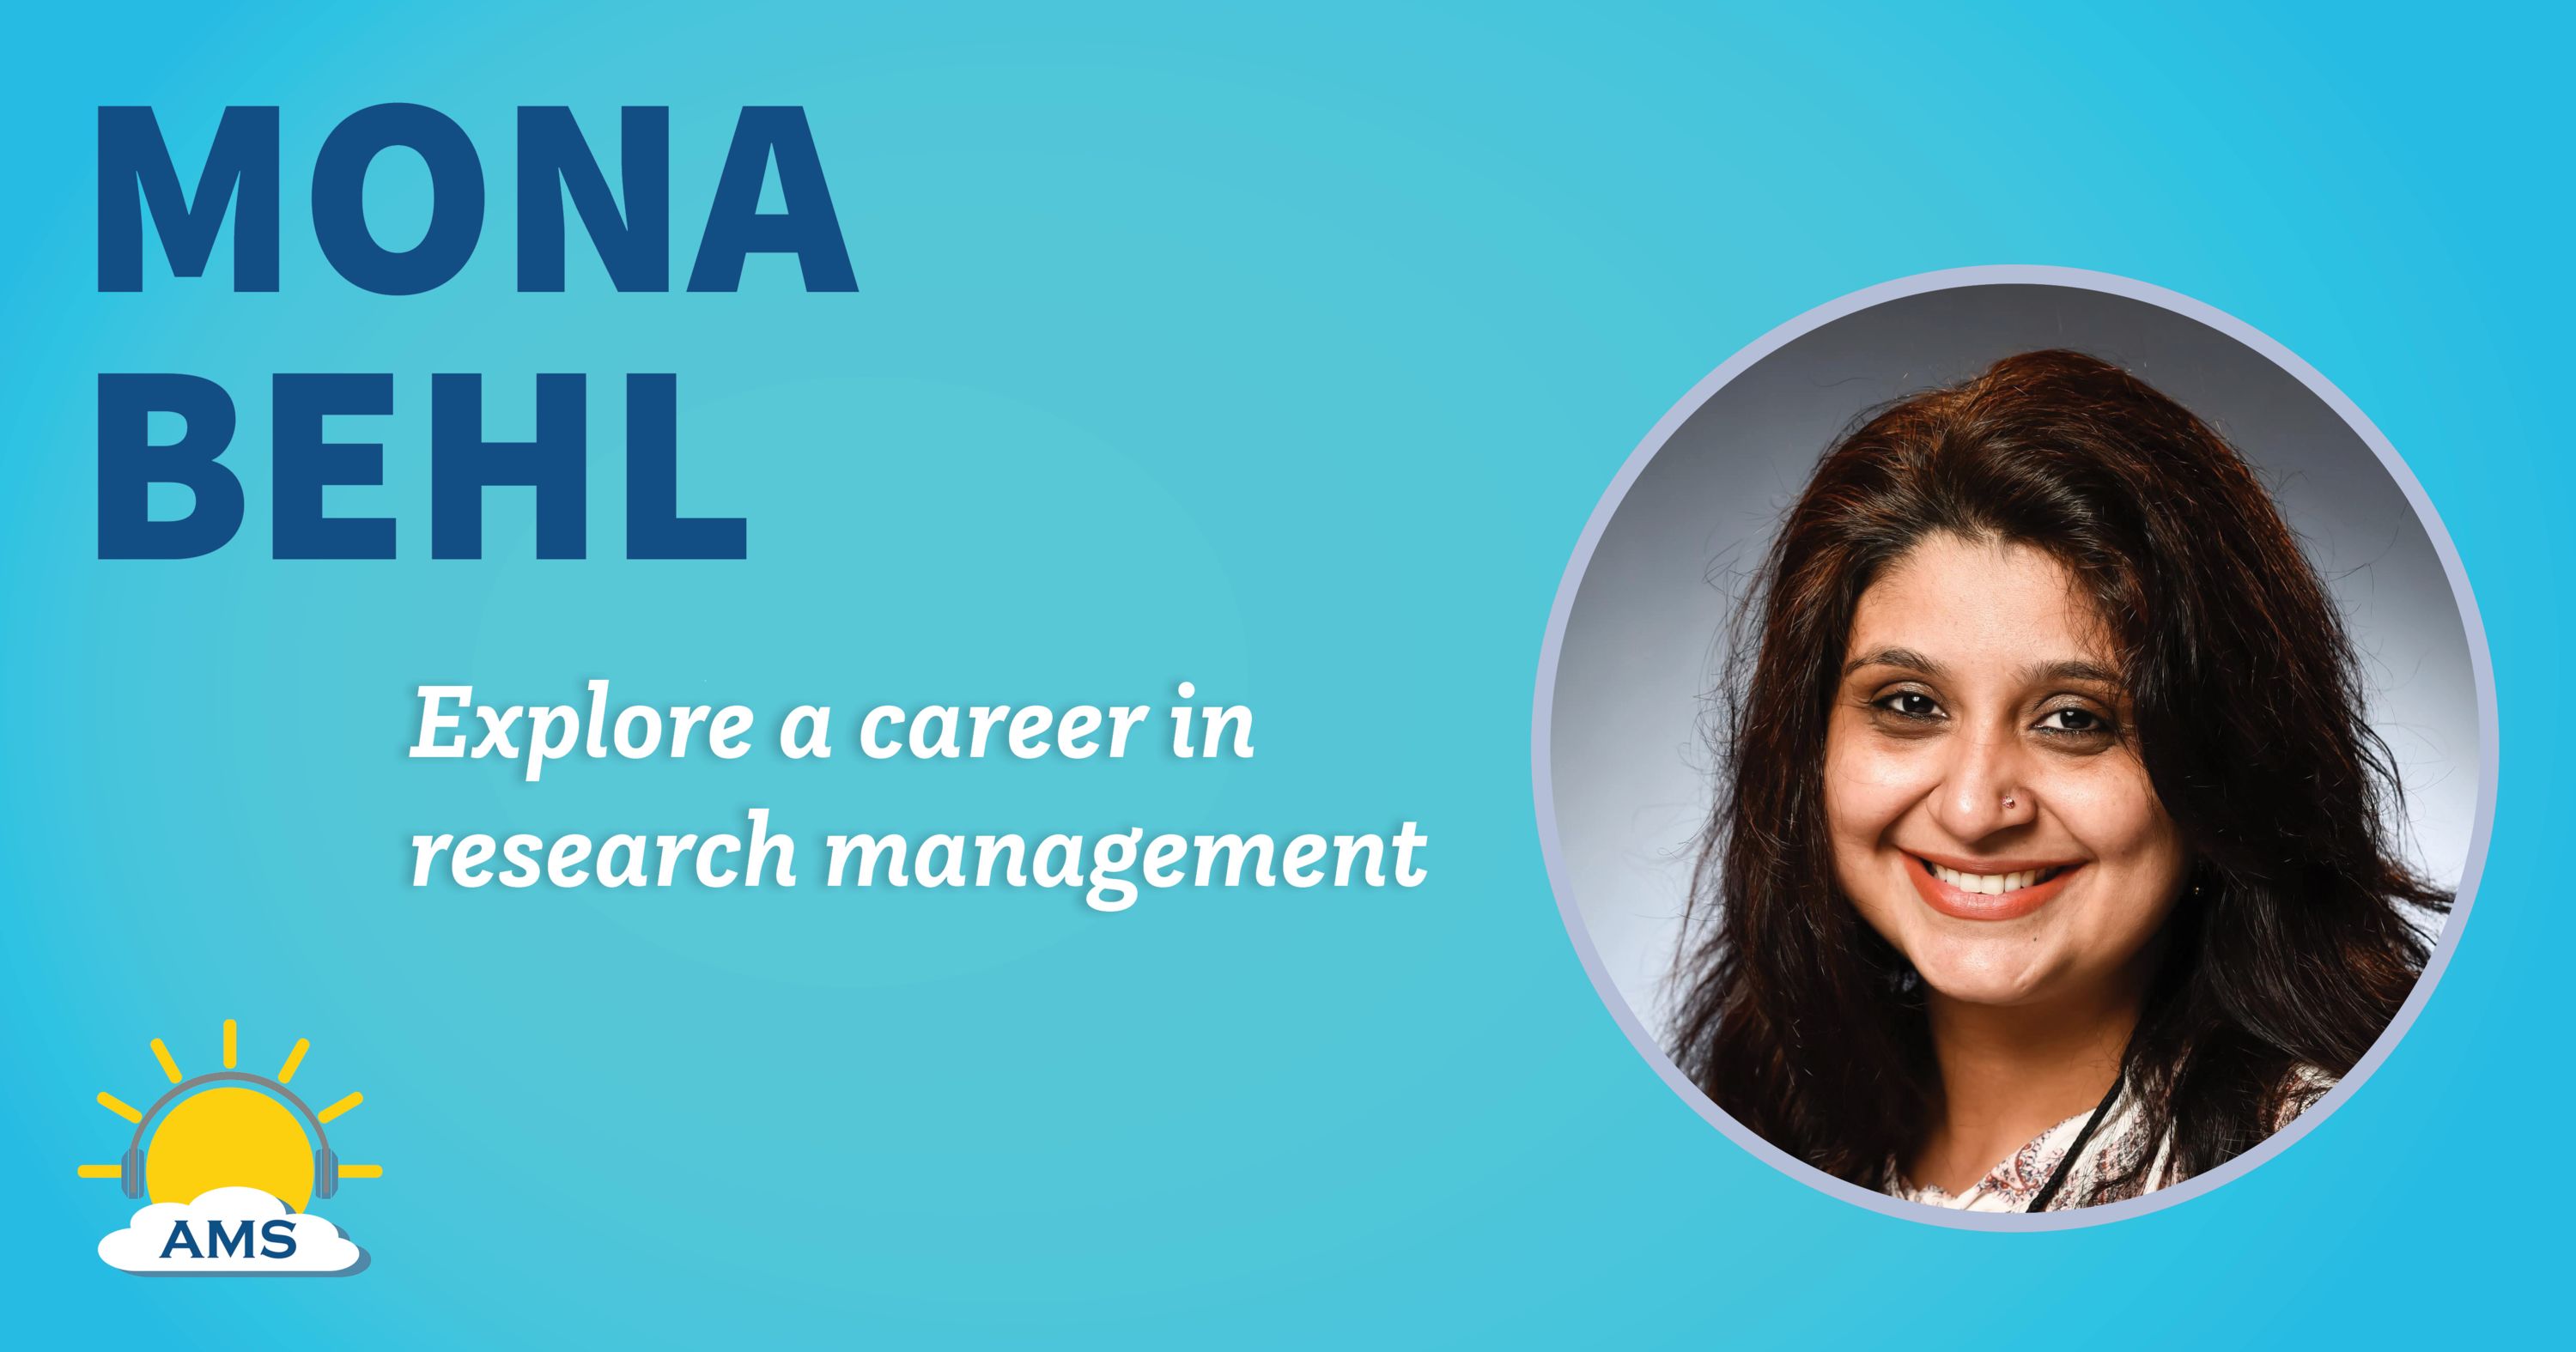 mona behl headshot graphic with teaser text that reads &quotexplore a career in research management"